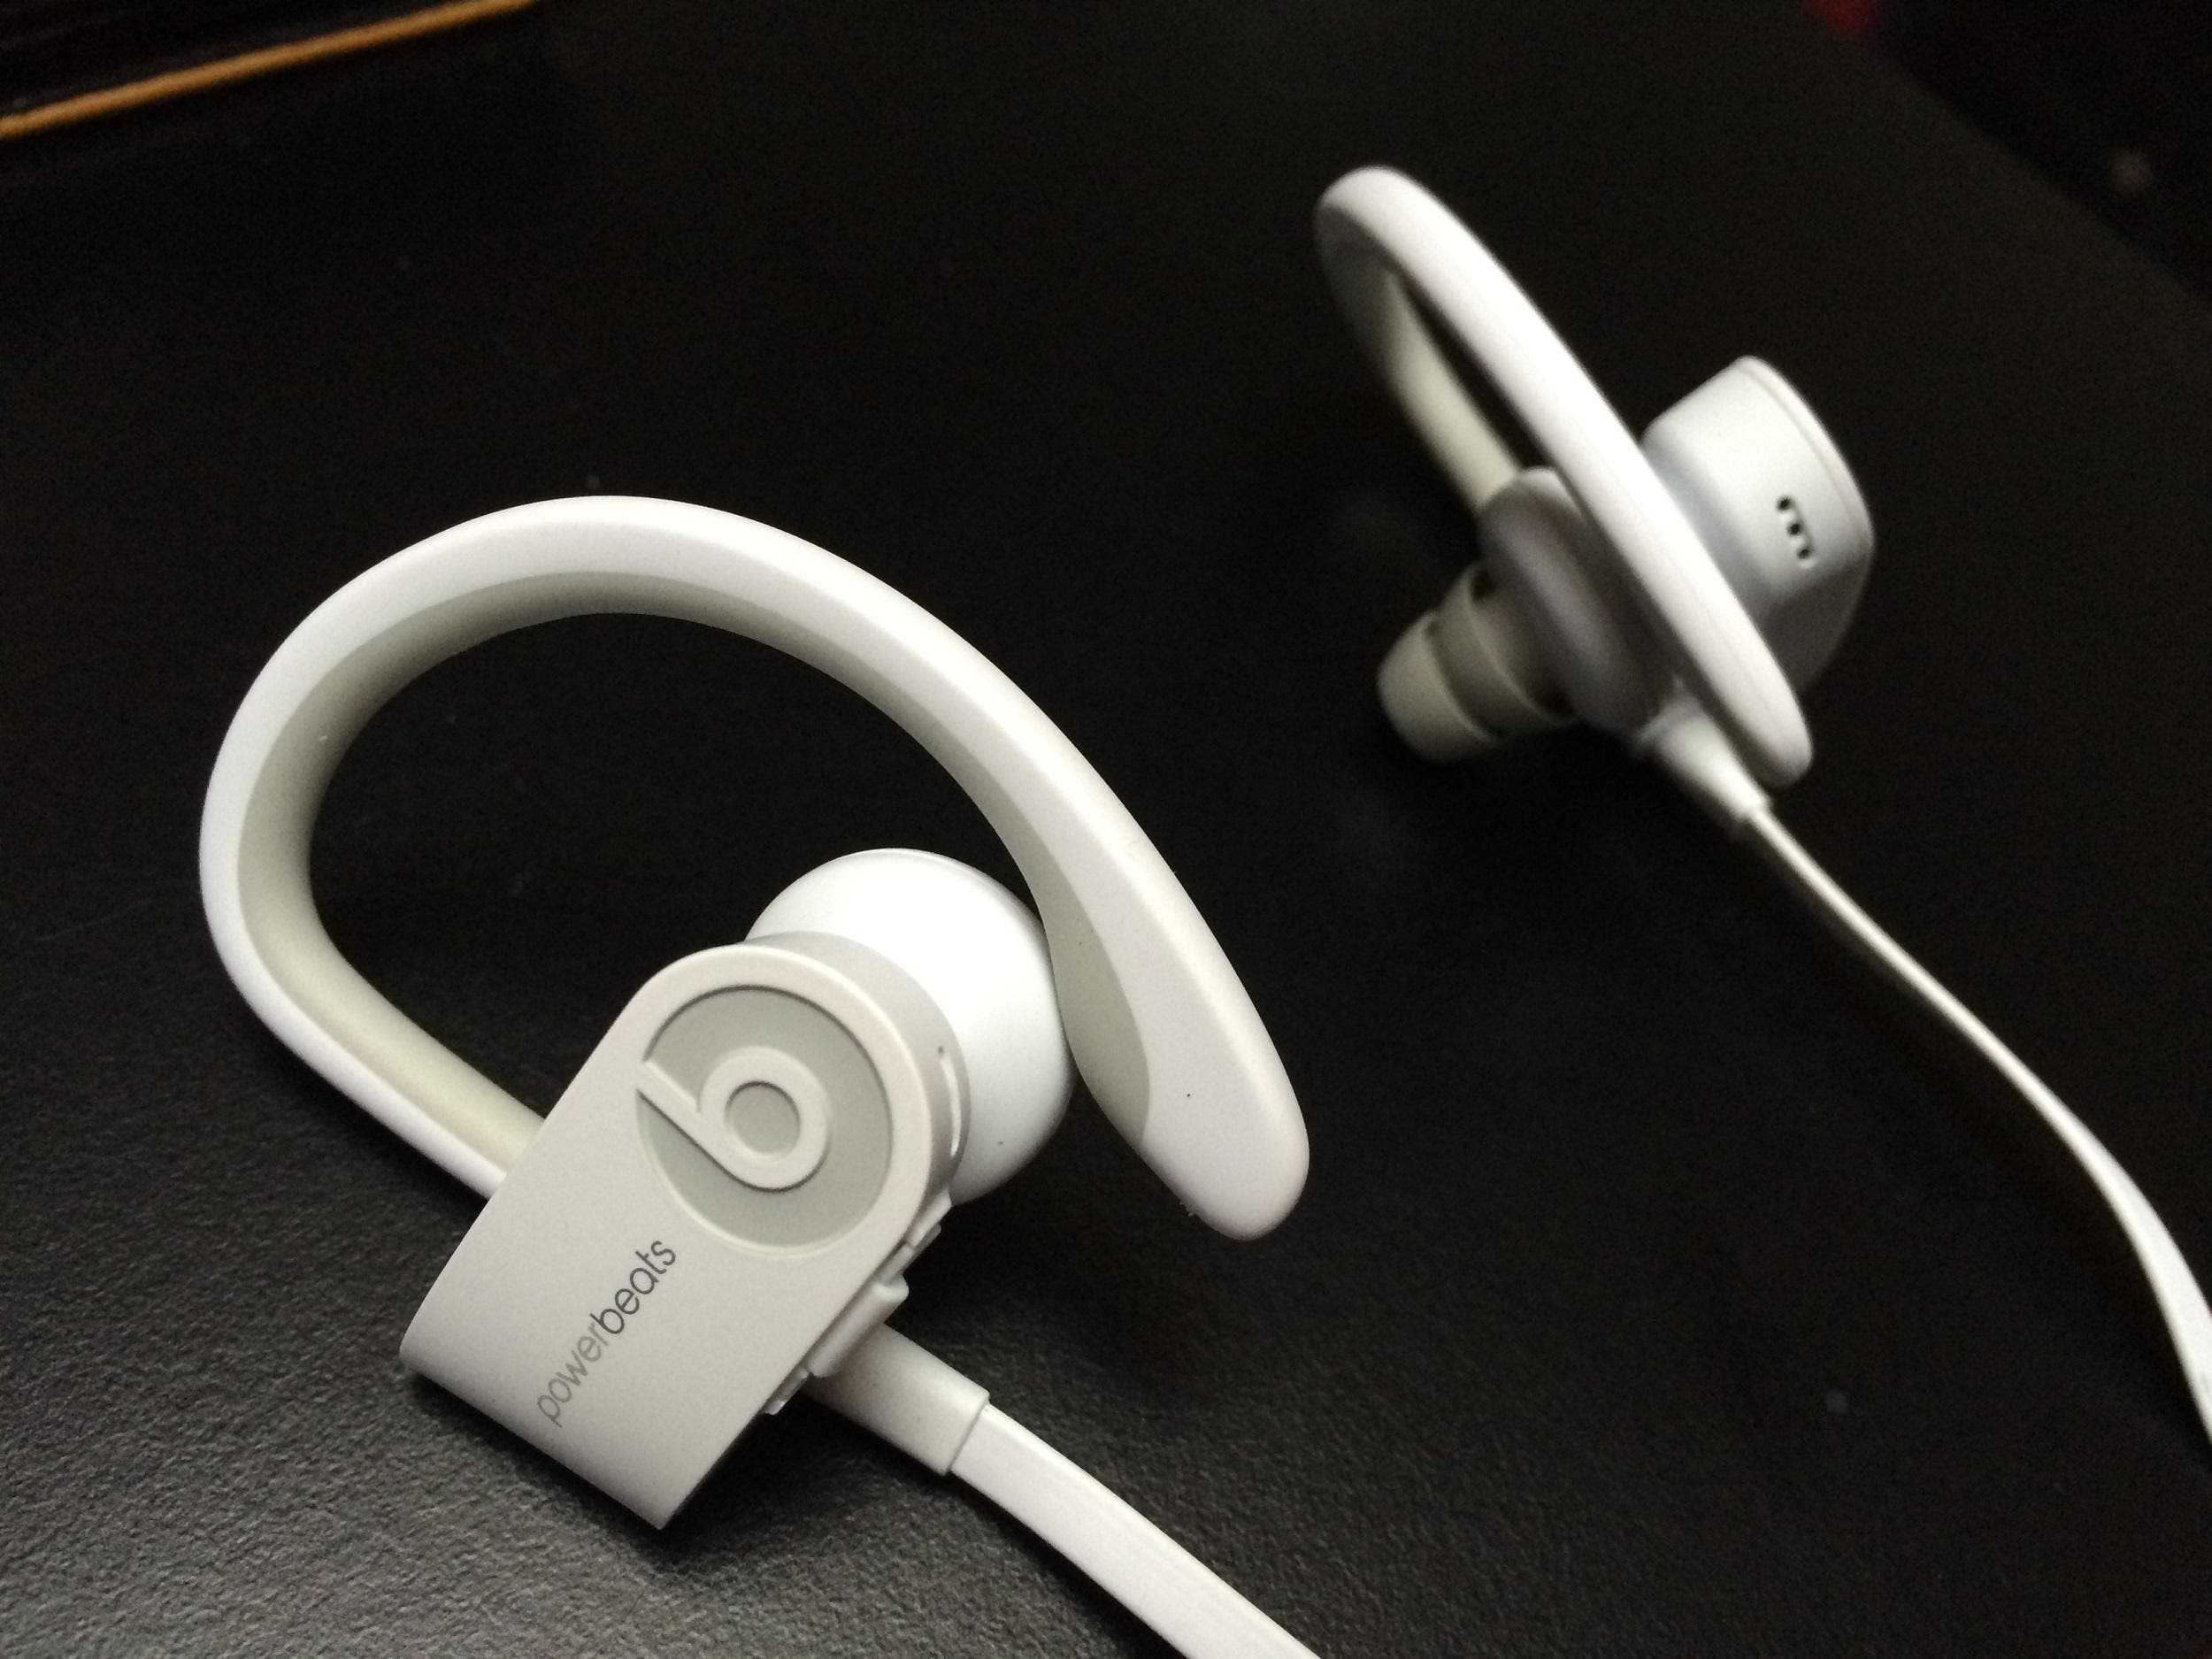 Apple settles over Powerbeats 2 design flaw, will pay $9.75 Million